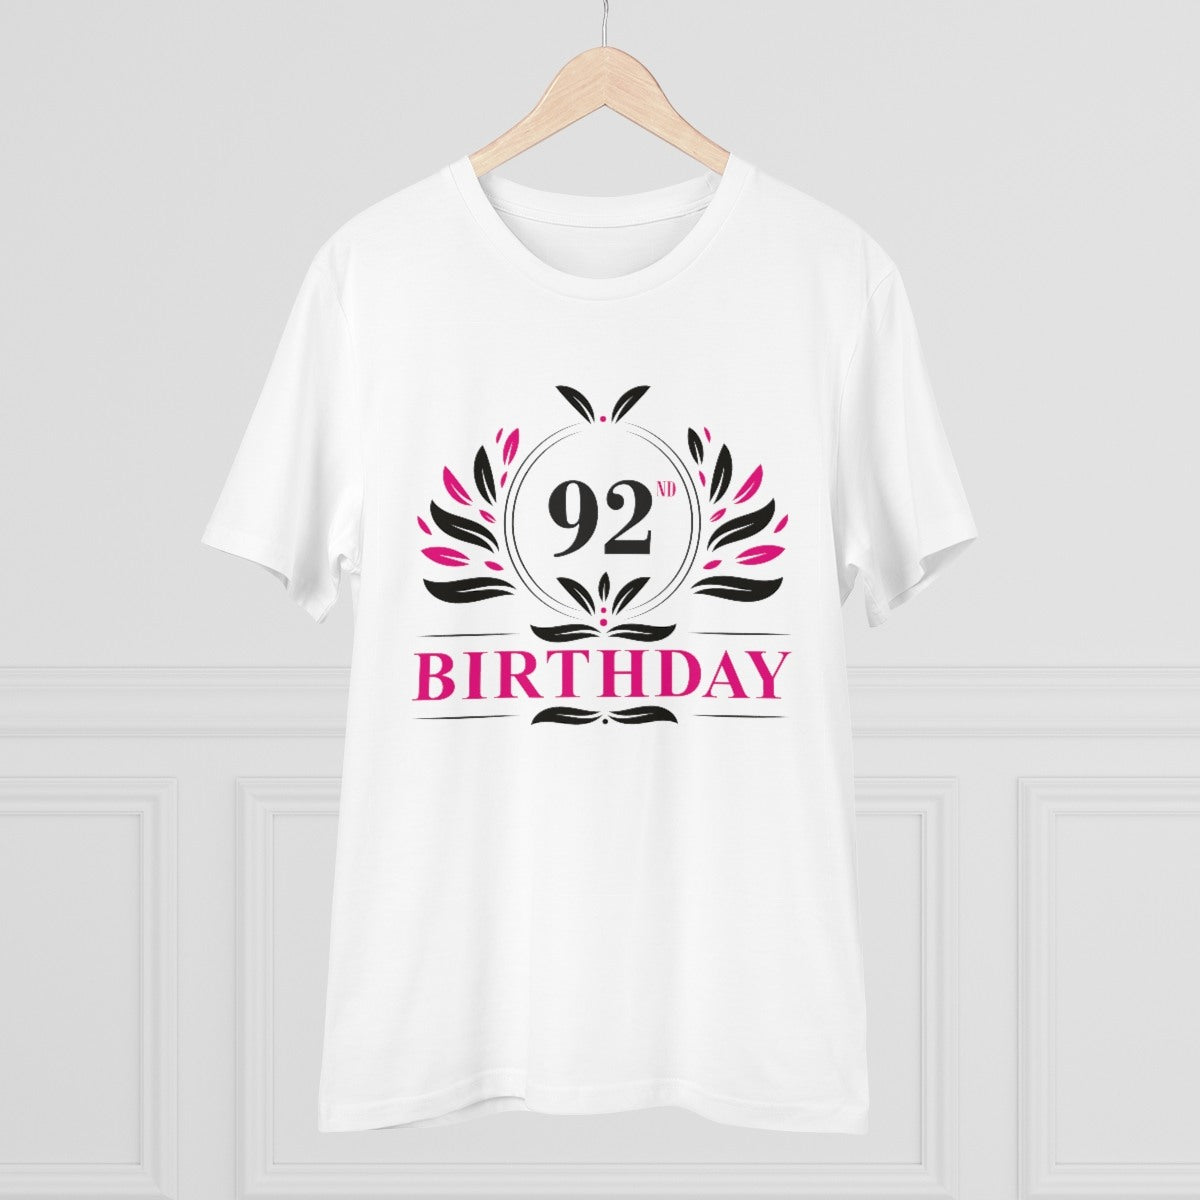 Men's PC Cotton 92nd Birthday Printed T Shirt (Color: White, Thread Count: 180GSM) - GillKart